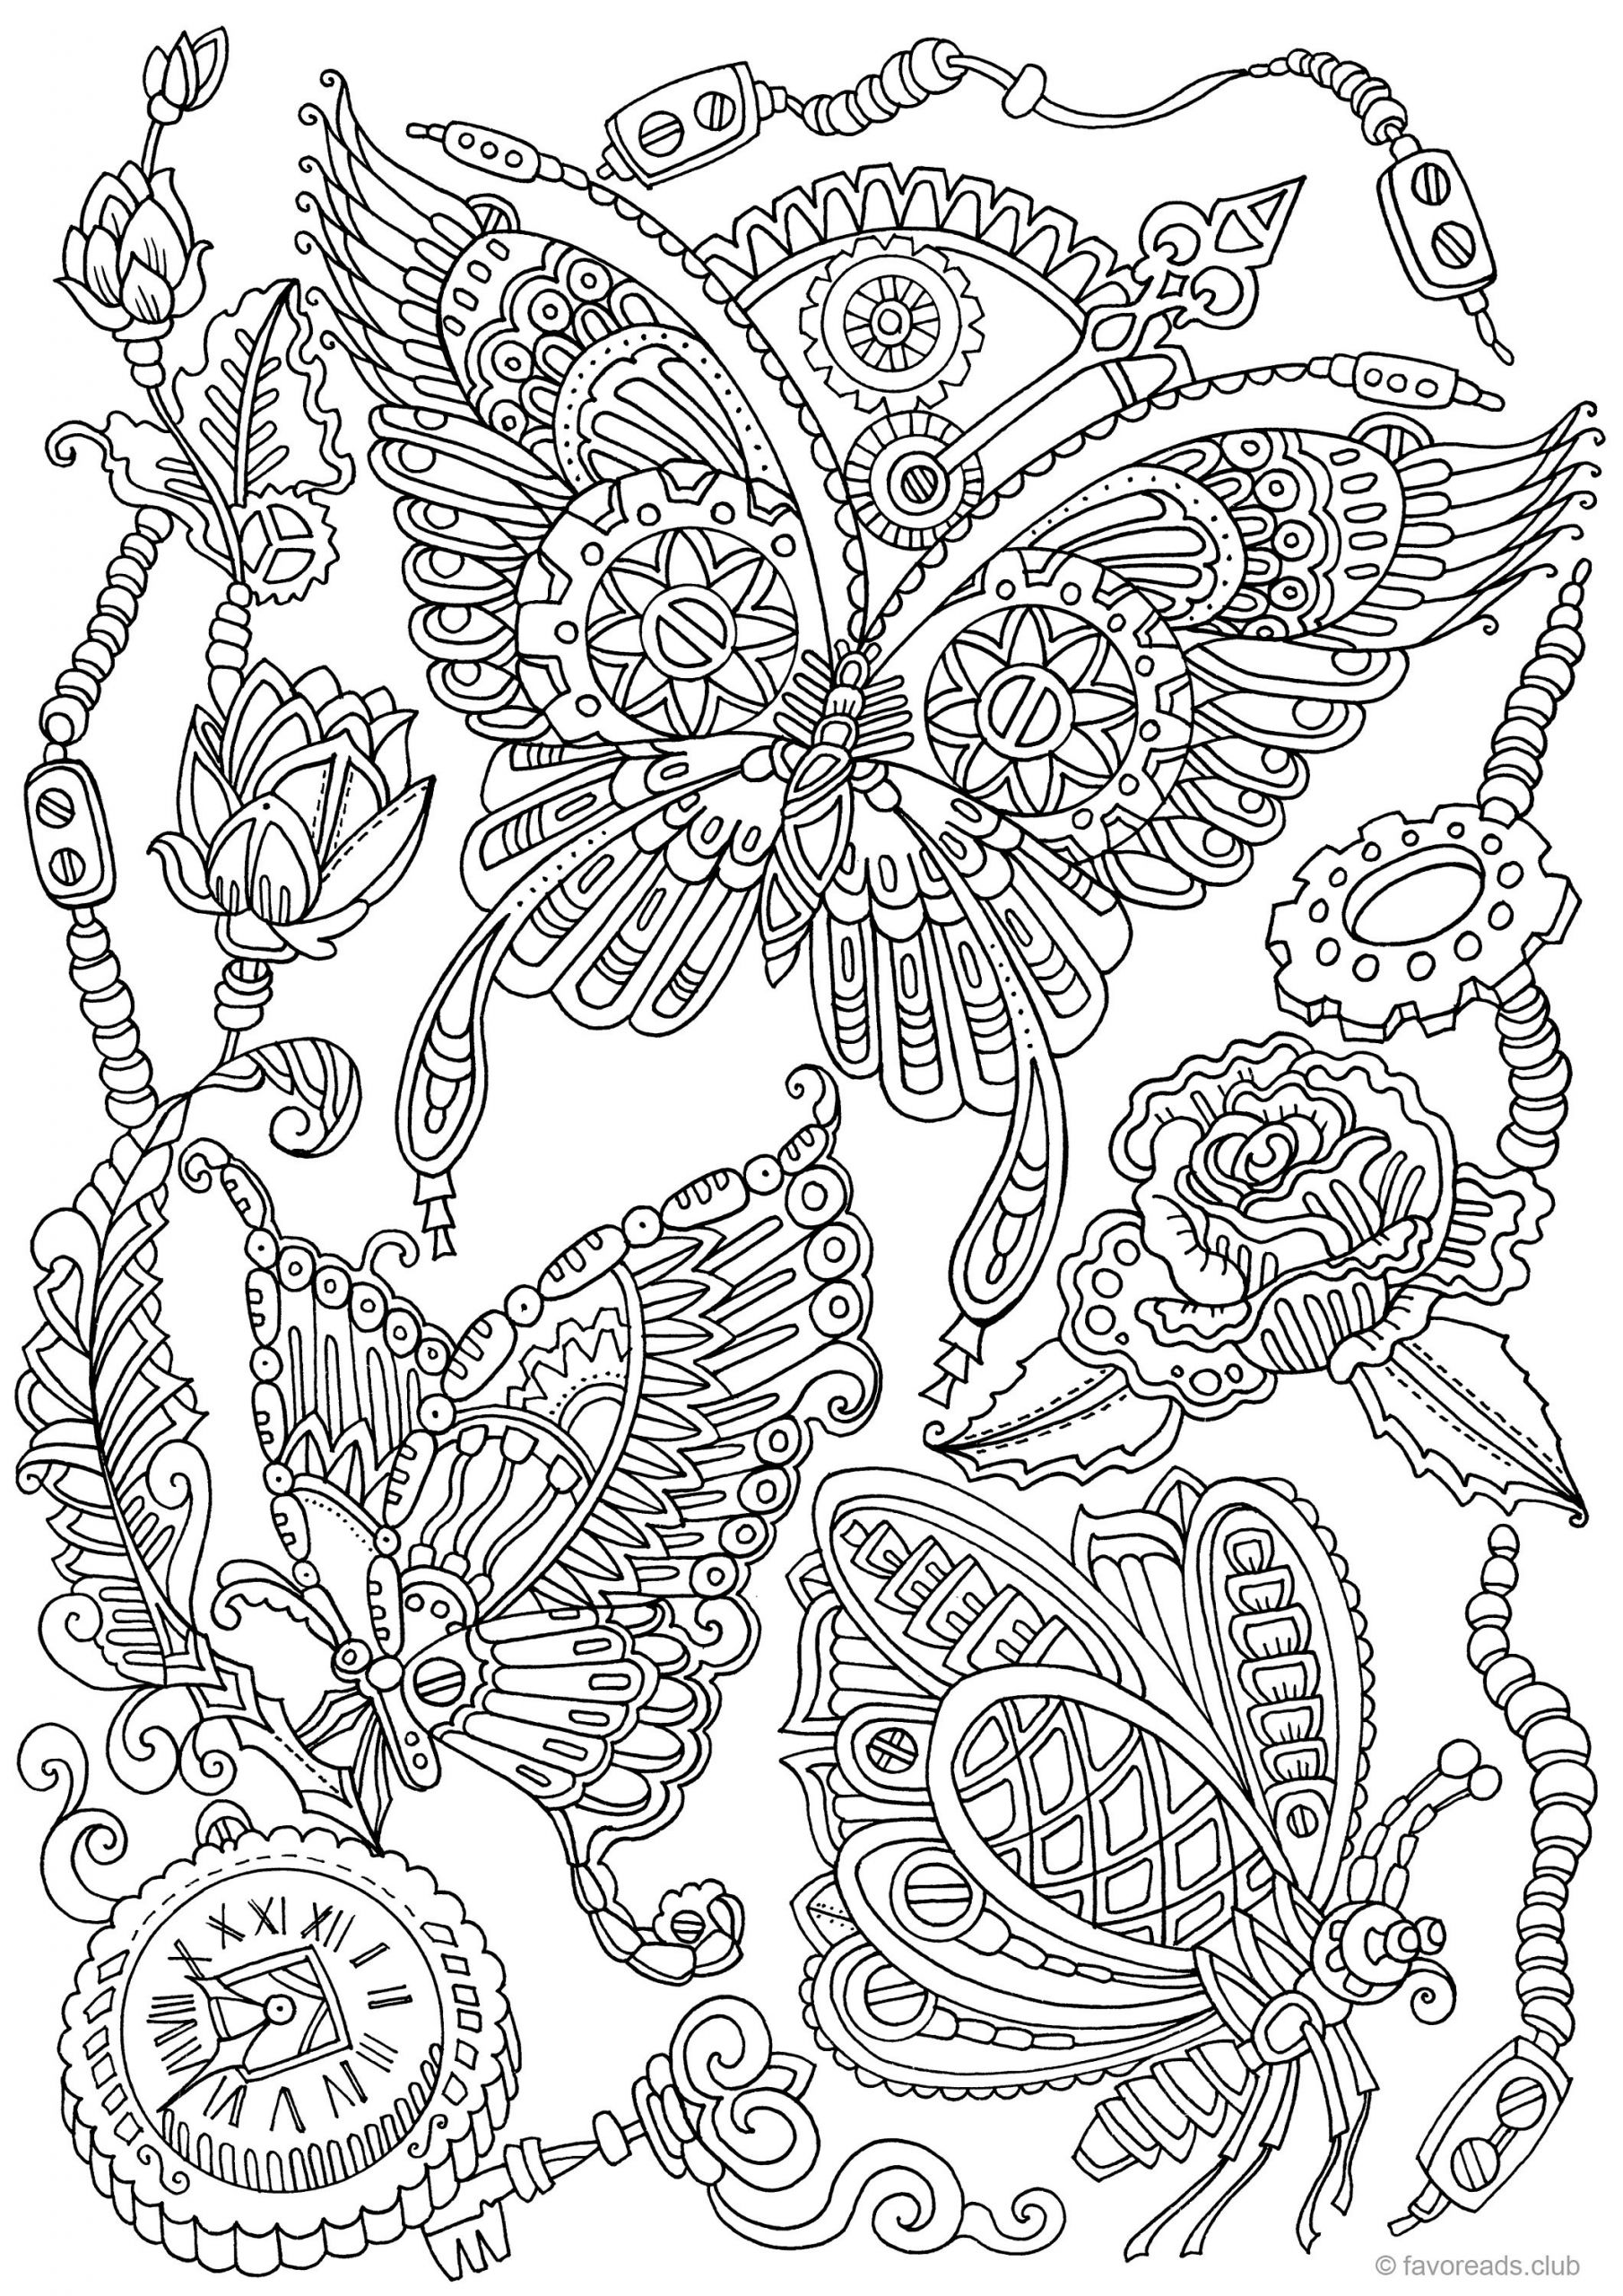 Adult Coloring Pages For Free
 Steampunk Butterflies Printable Adult Coloring Page from